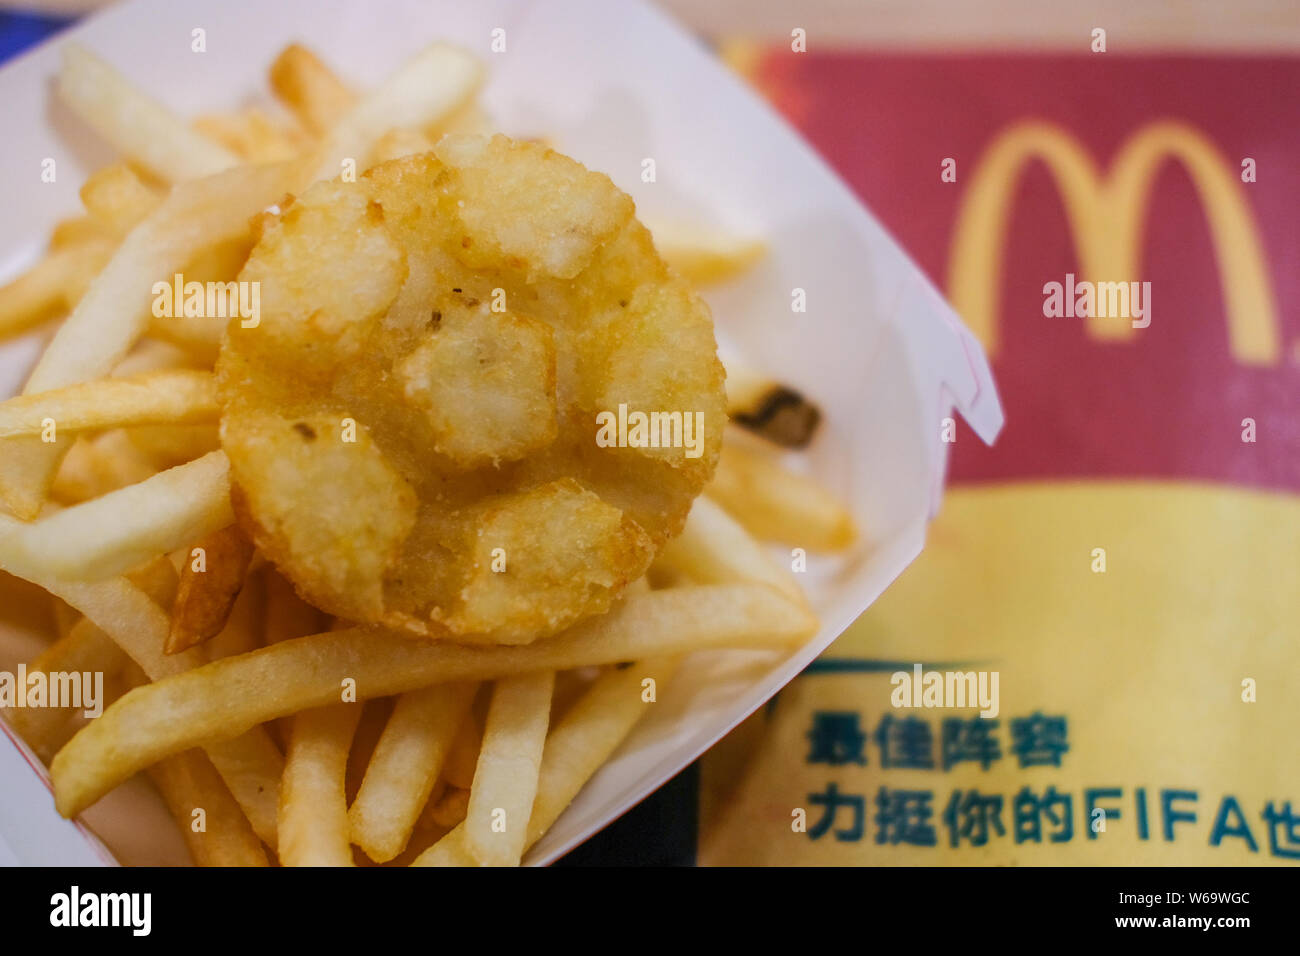 View of Gold Goal Hash Brown in the theme of FIFA World Cup launched by fastfood restaurant chain McDonald's served at a branch in Beijing, China, 14 Stock Photo